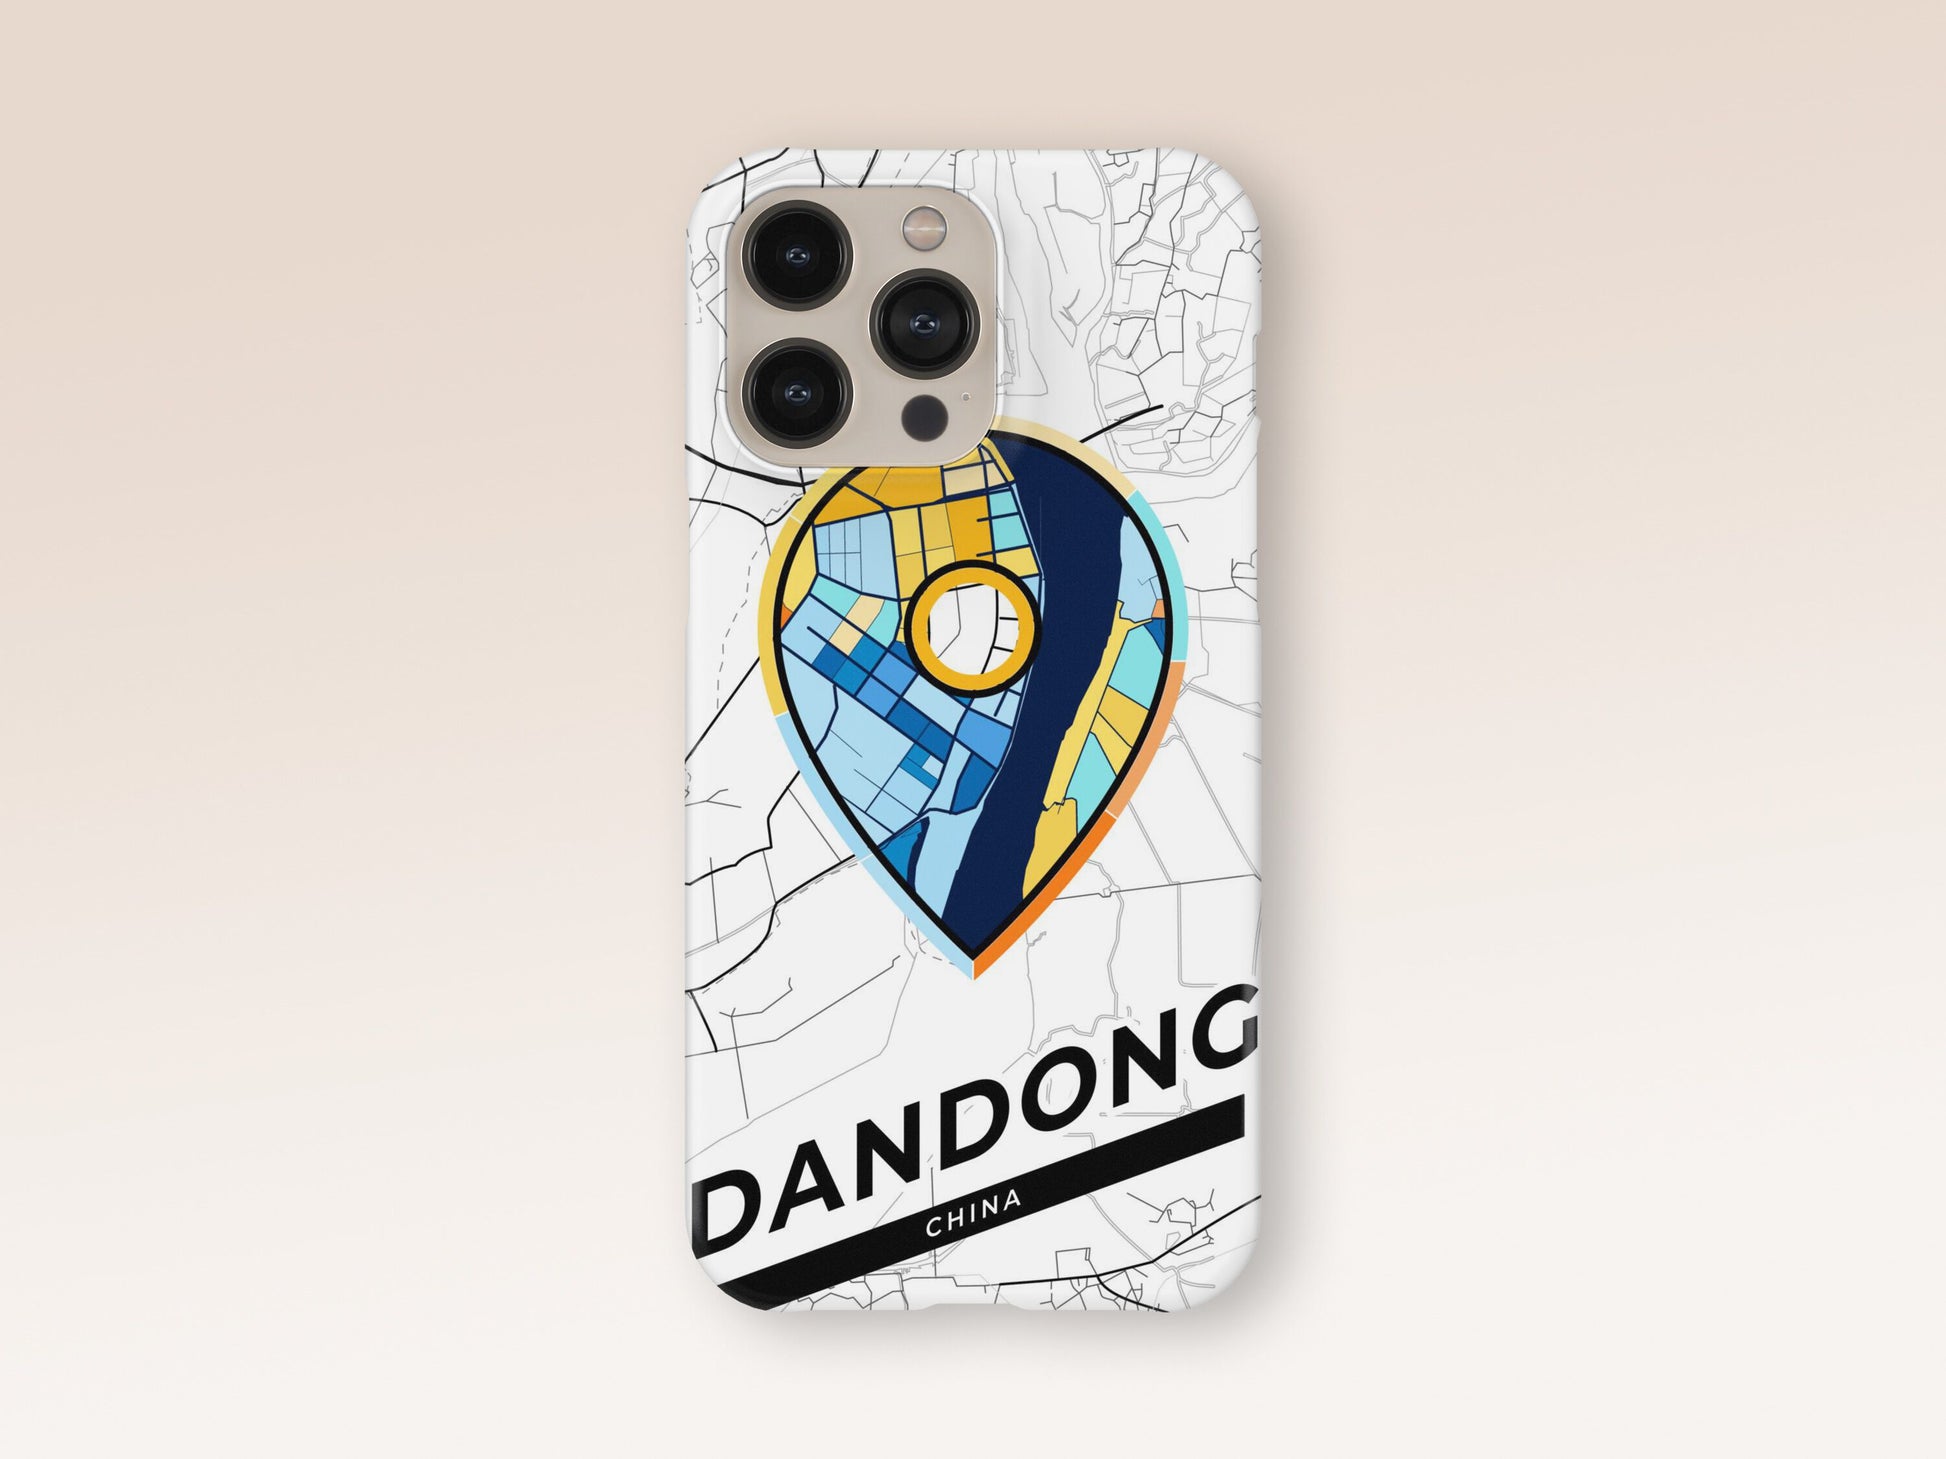 Dandong China slim phone case with colorful icon. Birthday, wedding or housewarming gift. Couple match cases. 1